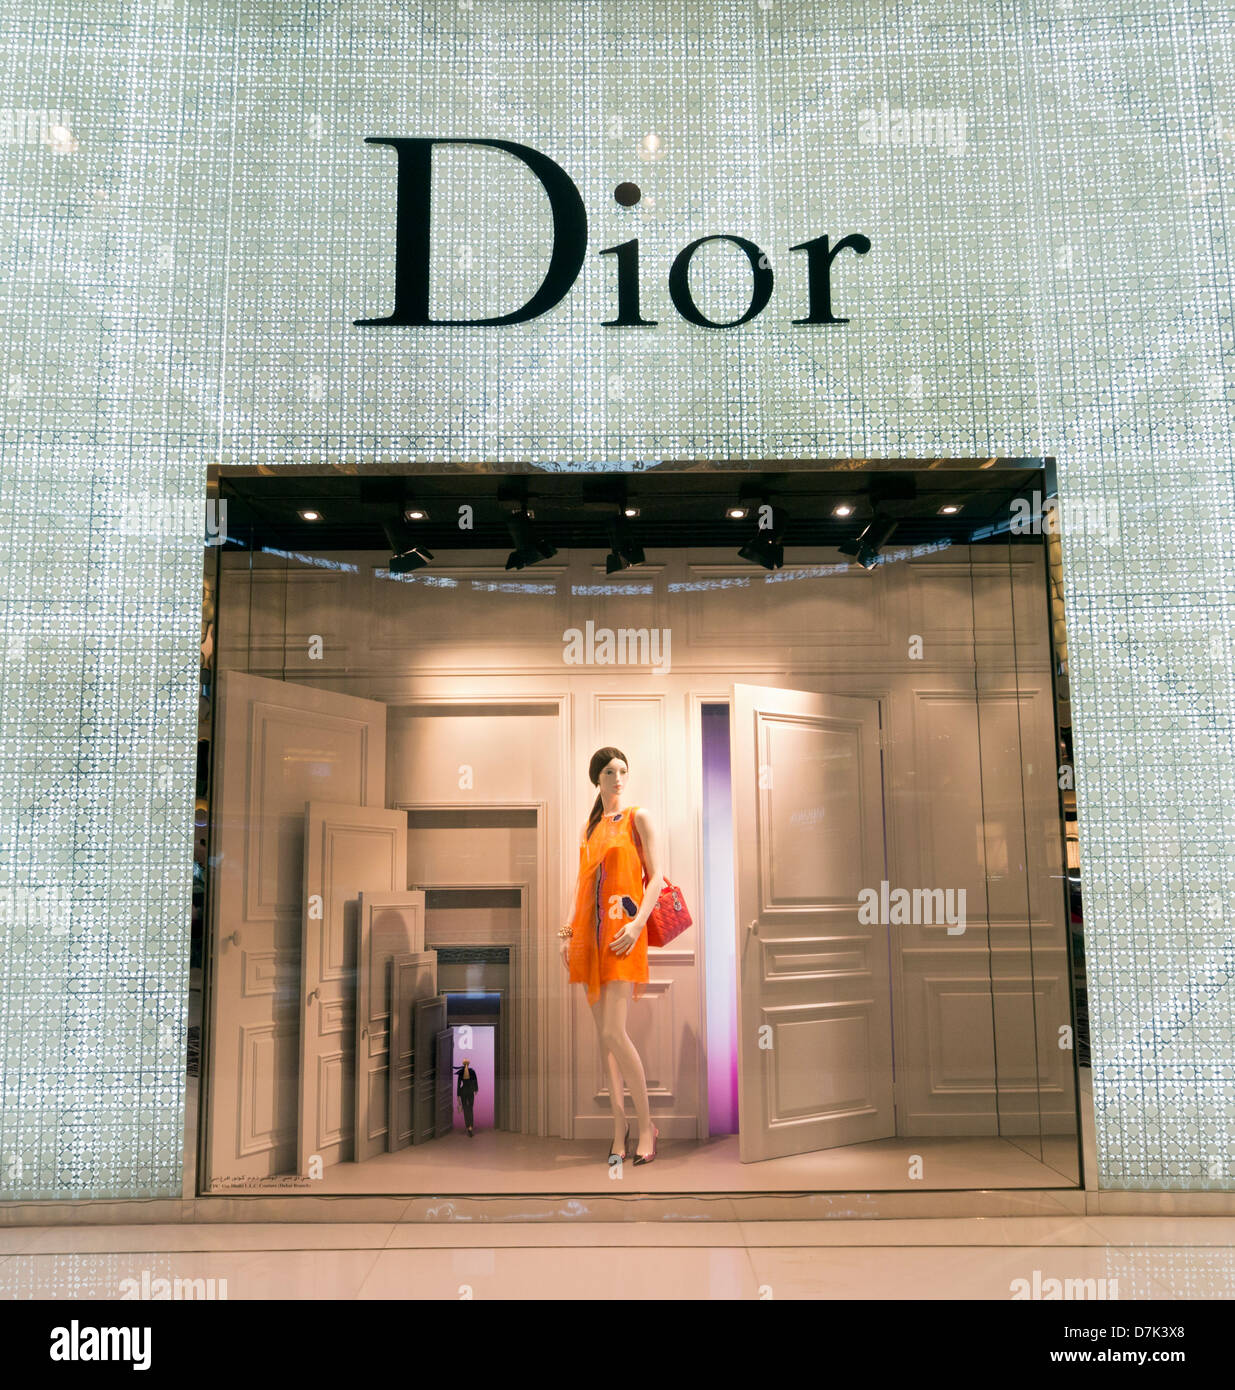 Dior Lights Up Shanghai With Christmas Popup at Zhangyuan